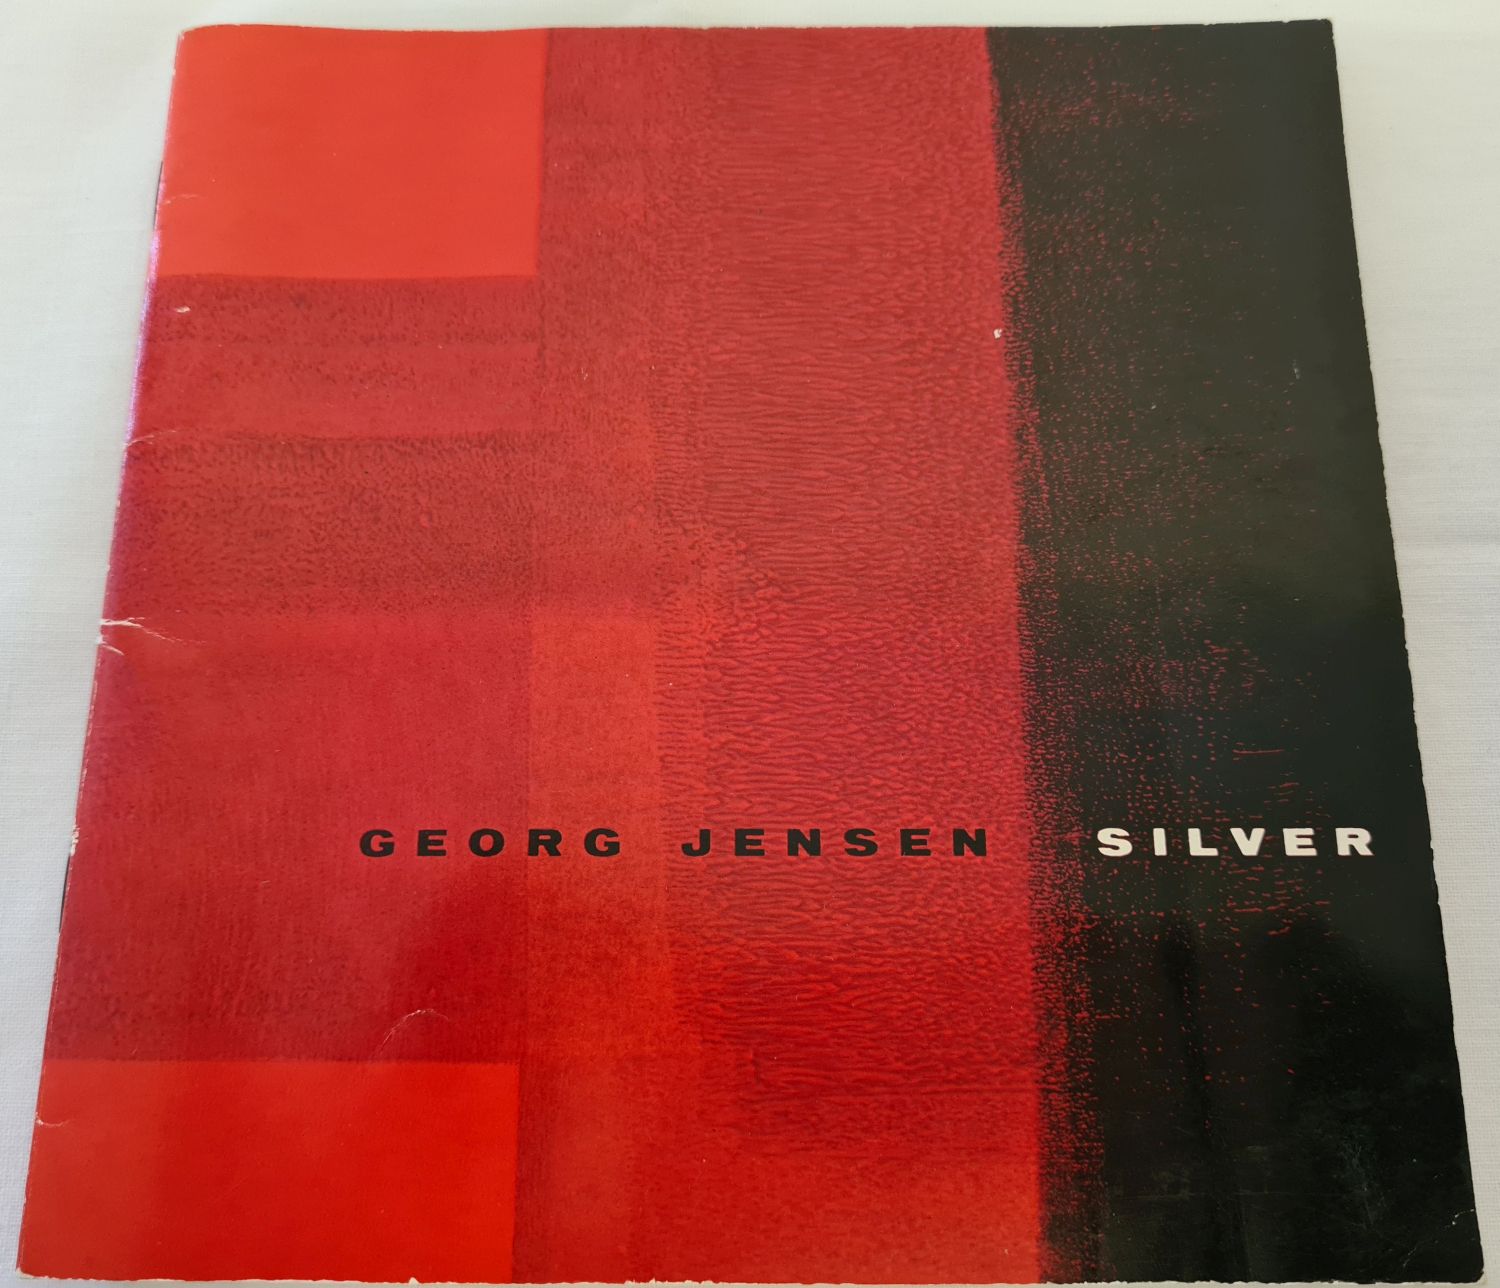 A vintage Georg Jensen silver jewellery photographic catalogue.